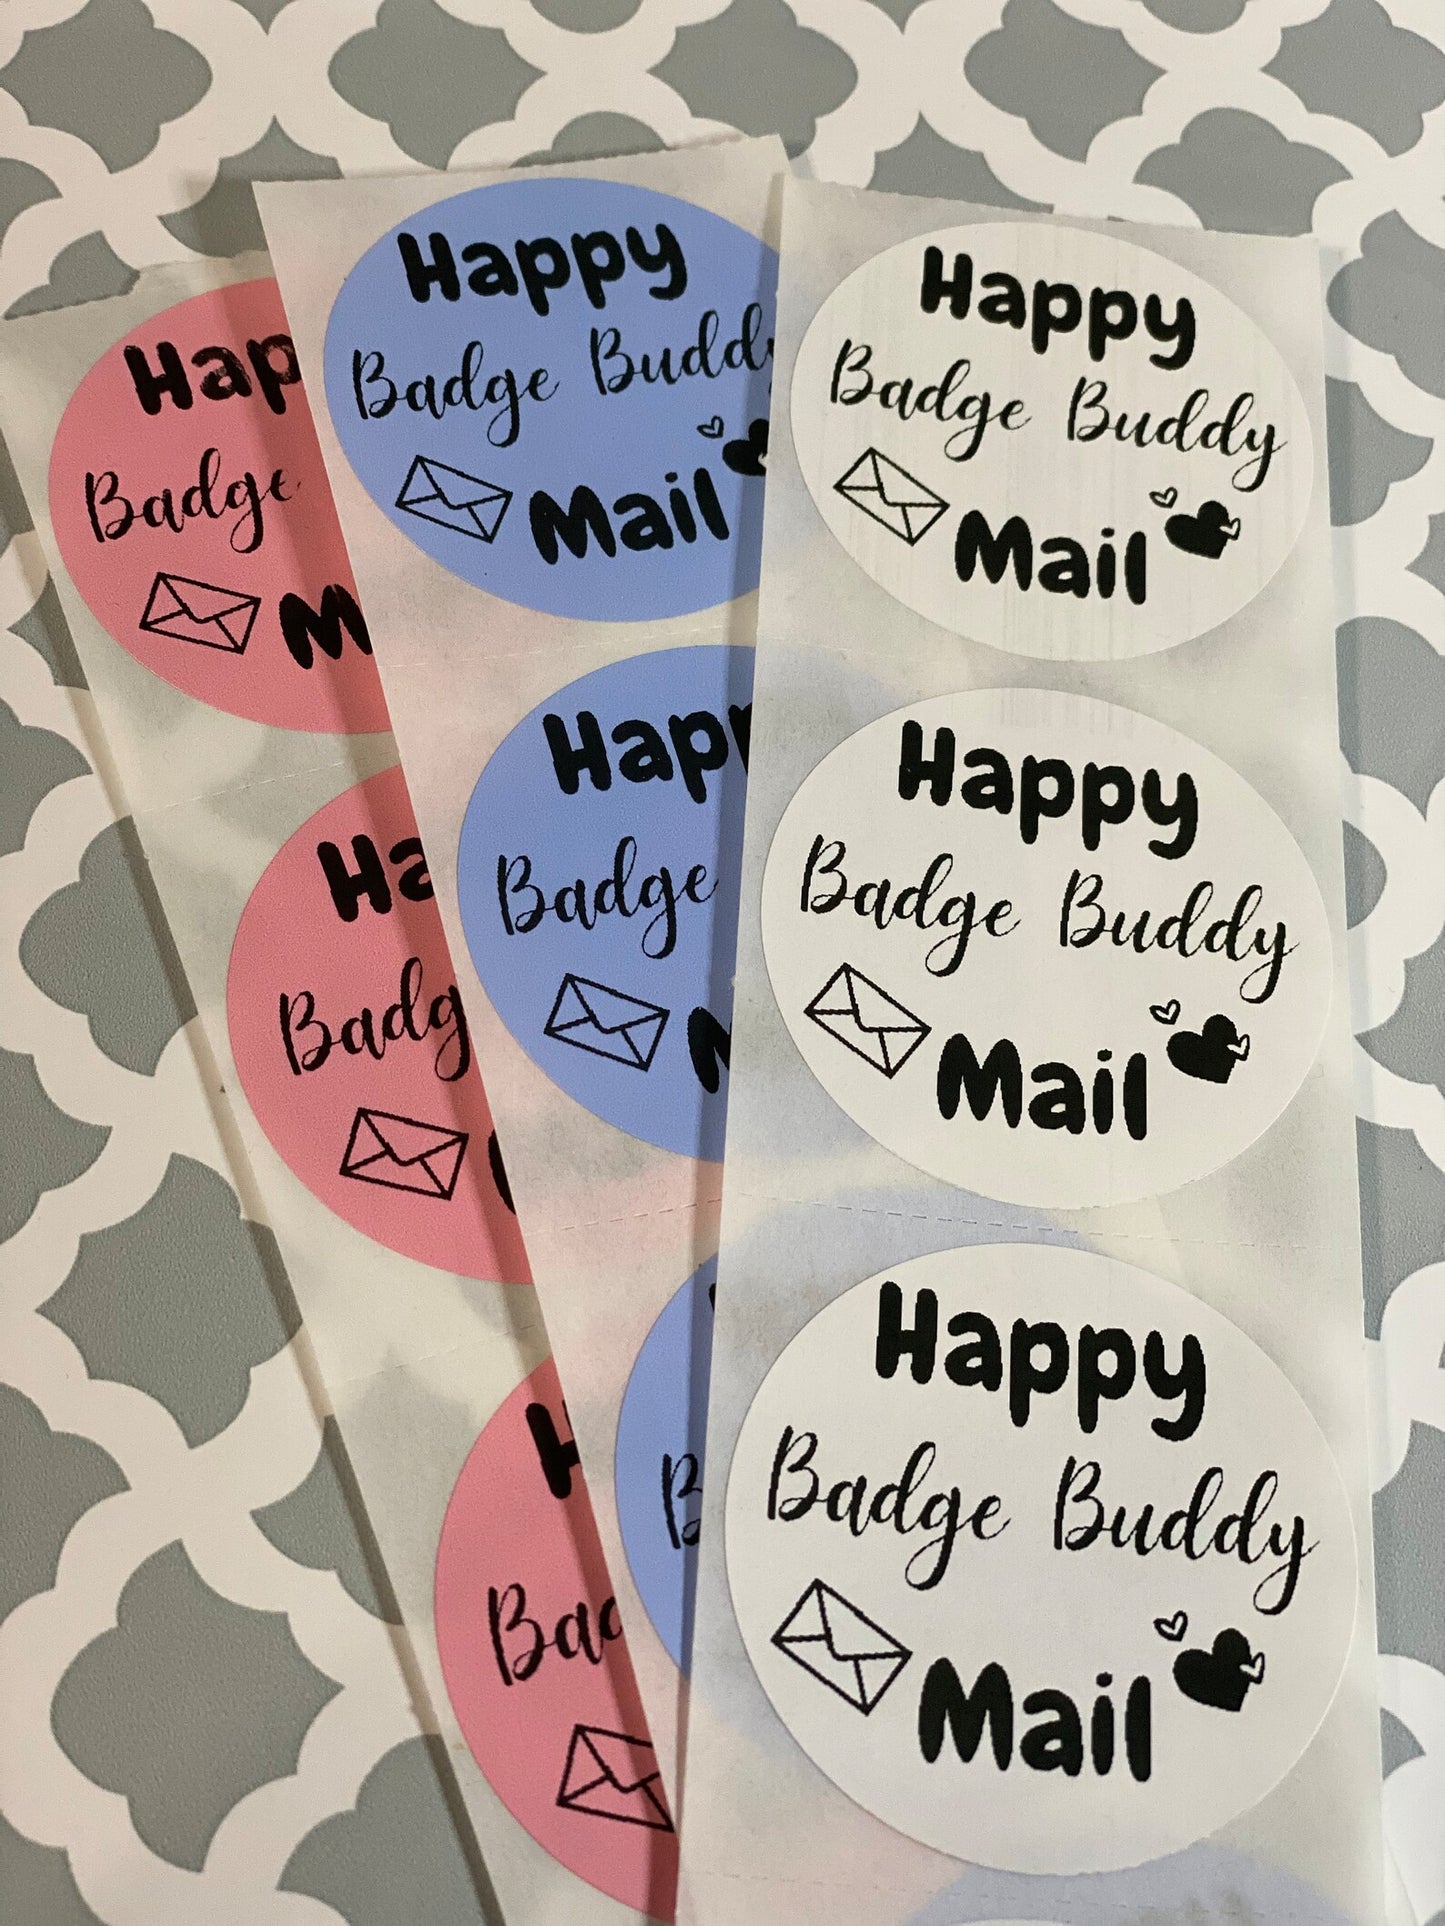 Badge Buddy Mail Thermal Printed Stickers